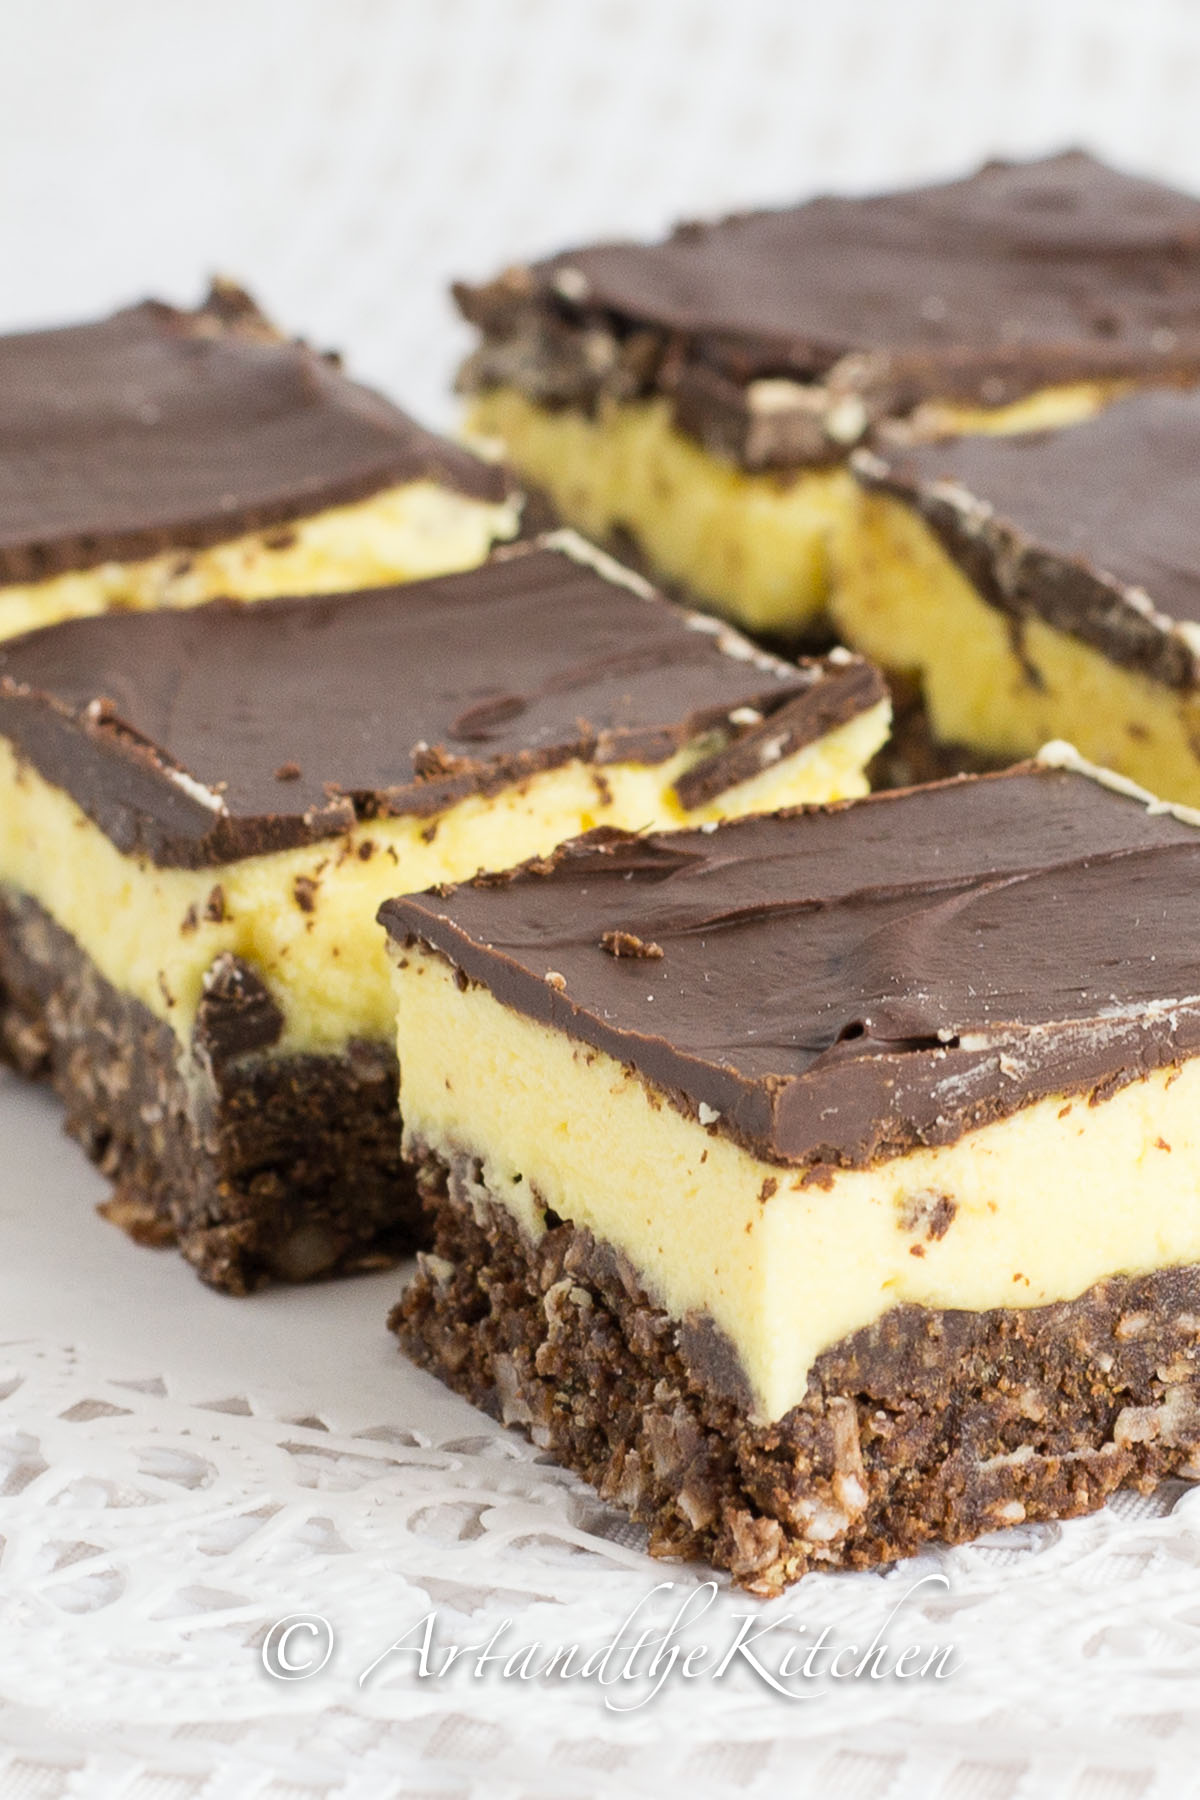 Rows of cut up squares that have layers of chocolate, yellow custard and chocolate coconut crust.